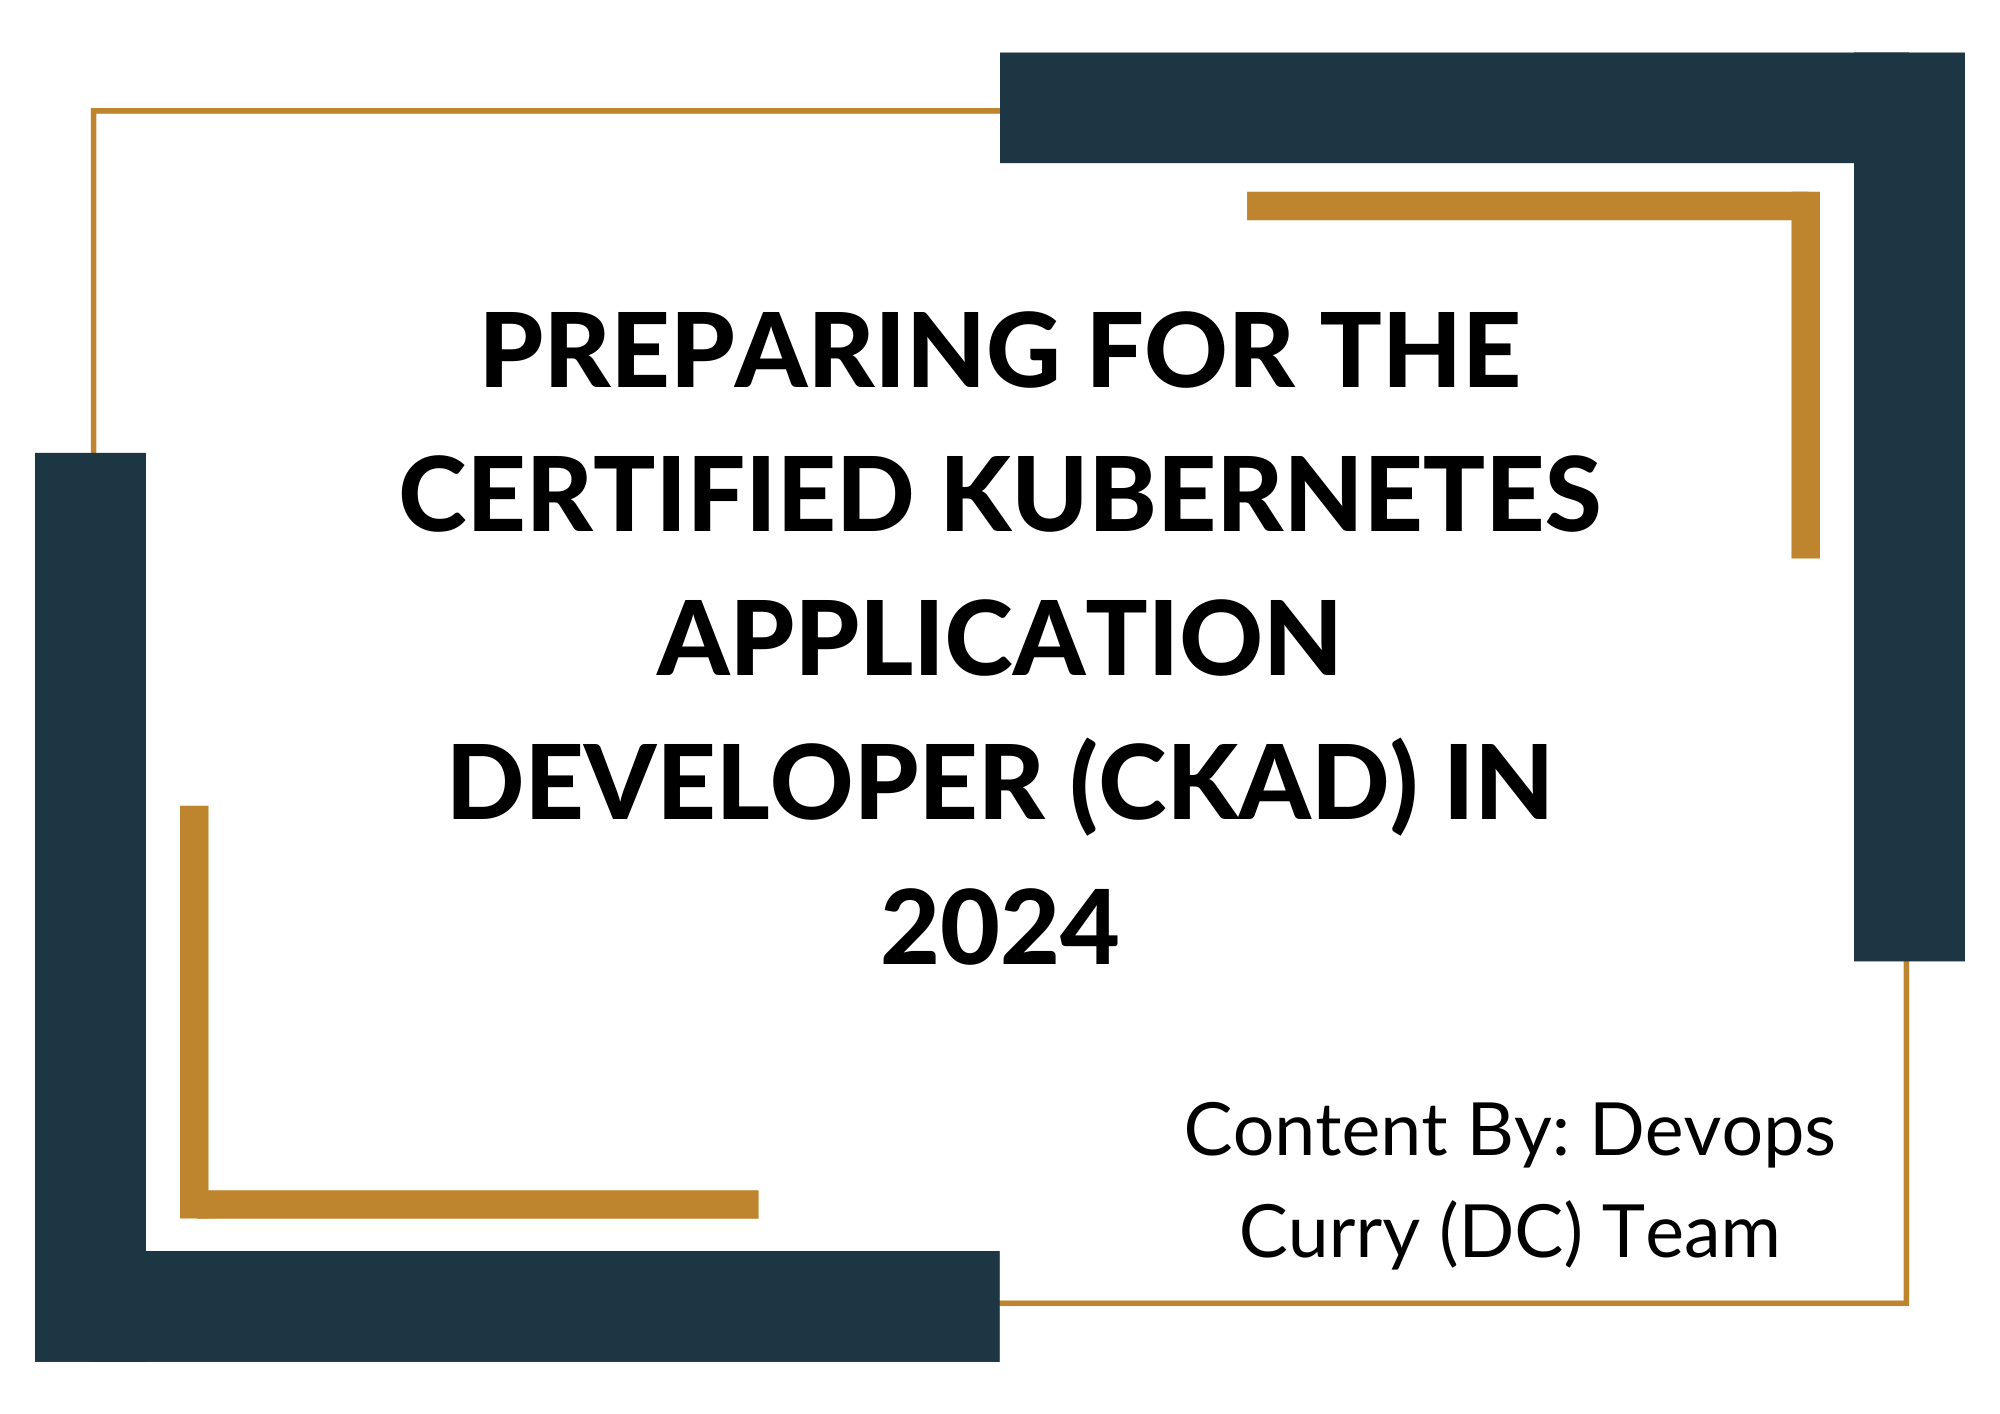 Preparing for the Certified Kubernetes Application Developer (CKAD) in 2024